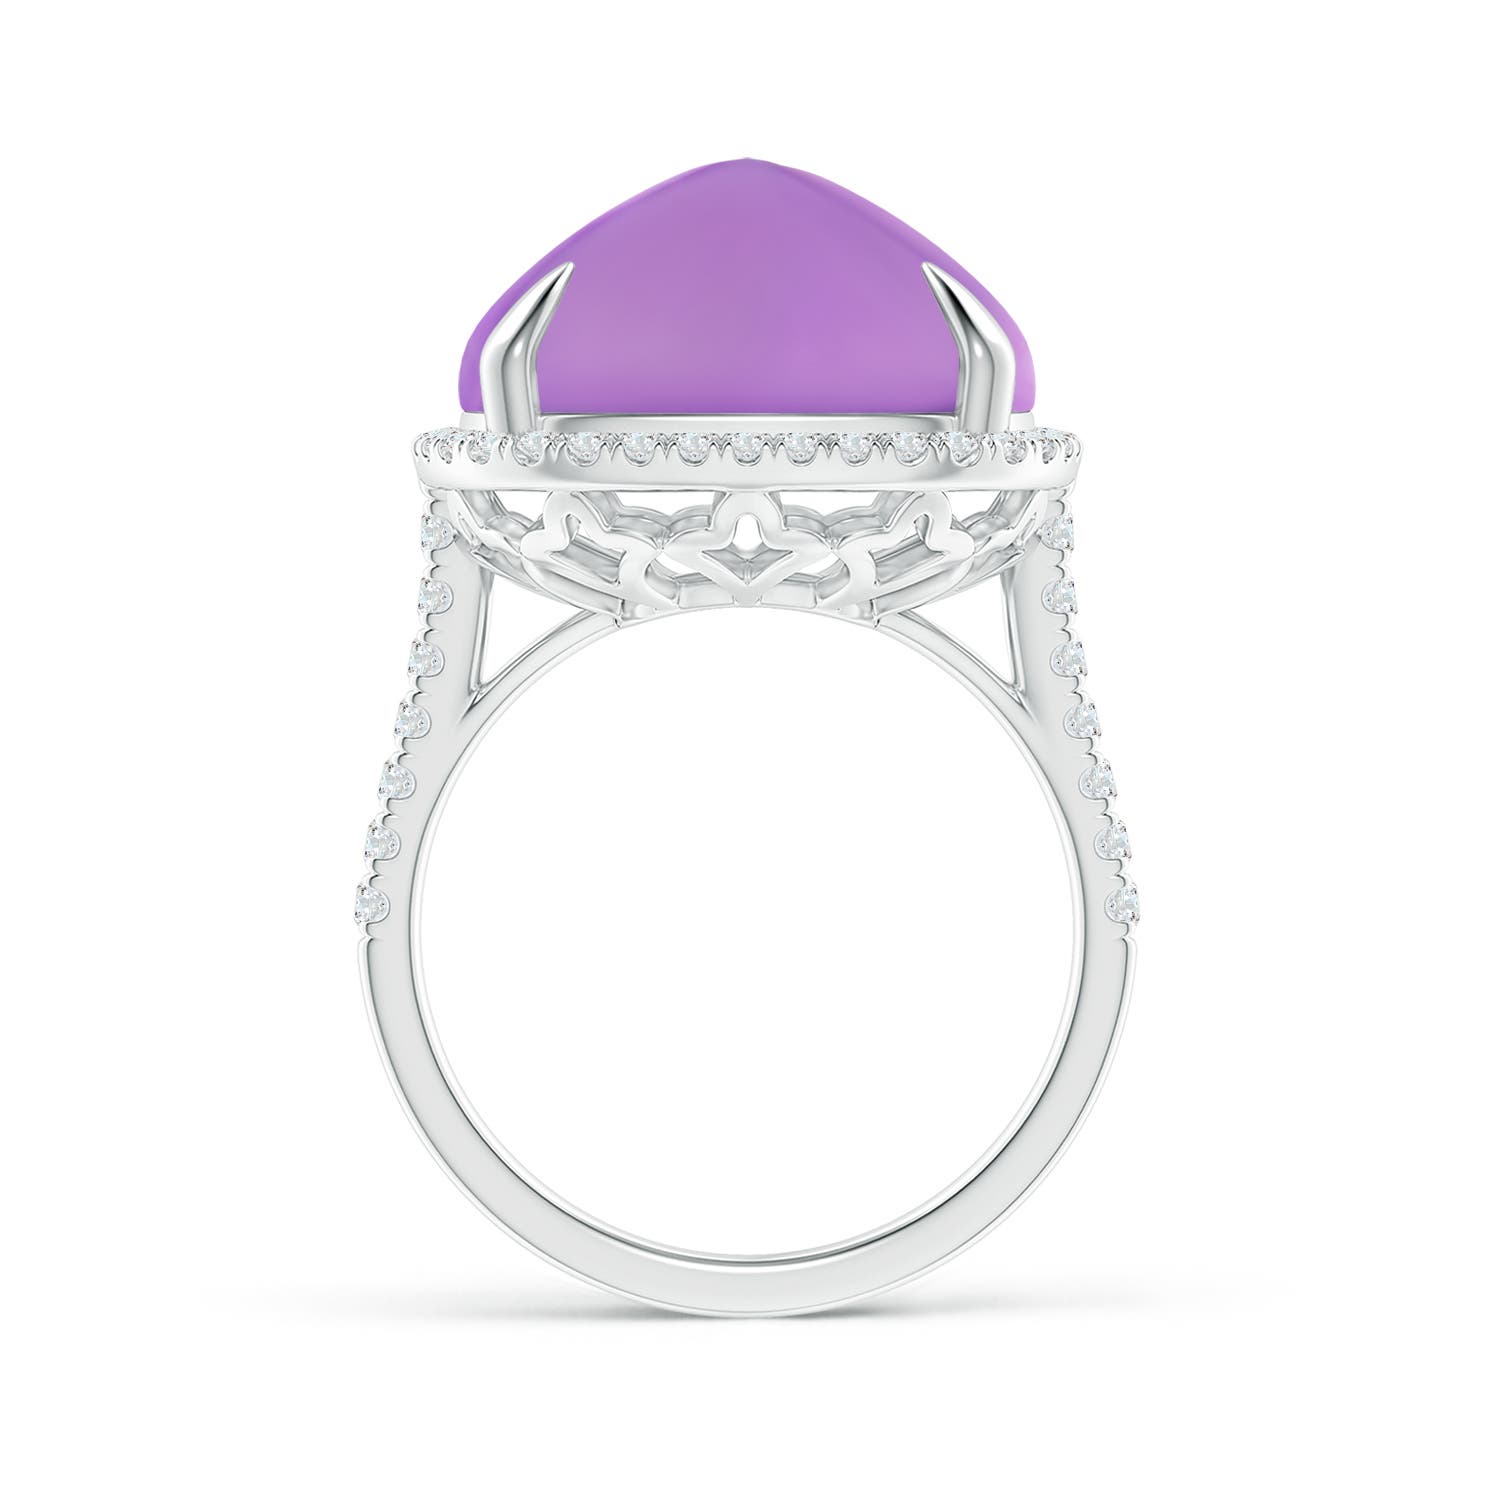 AA - Amethyst / 16.02 CT / 14 KT White Gold